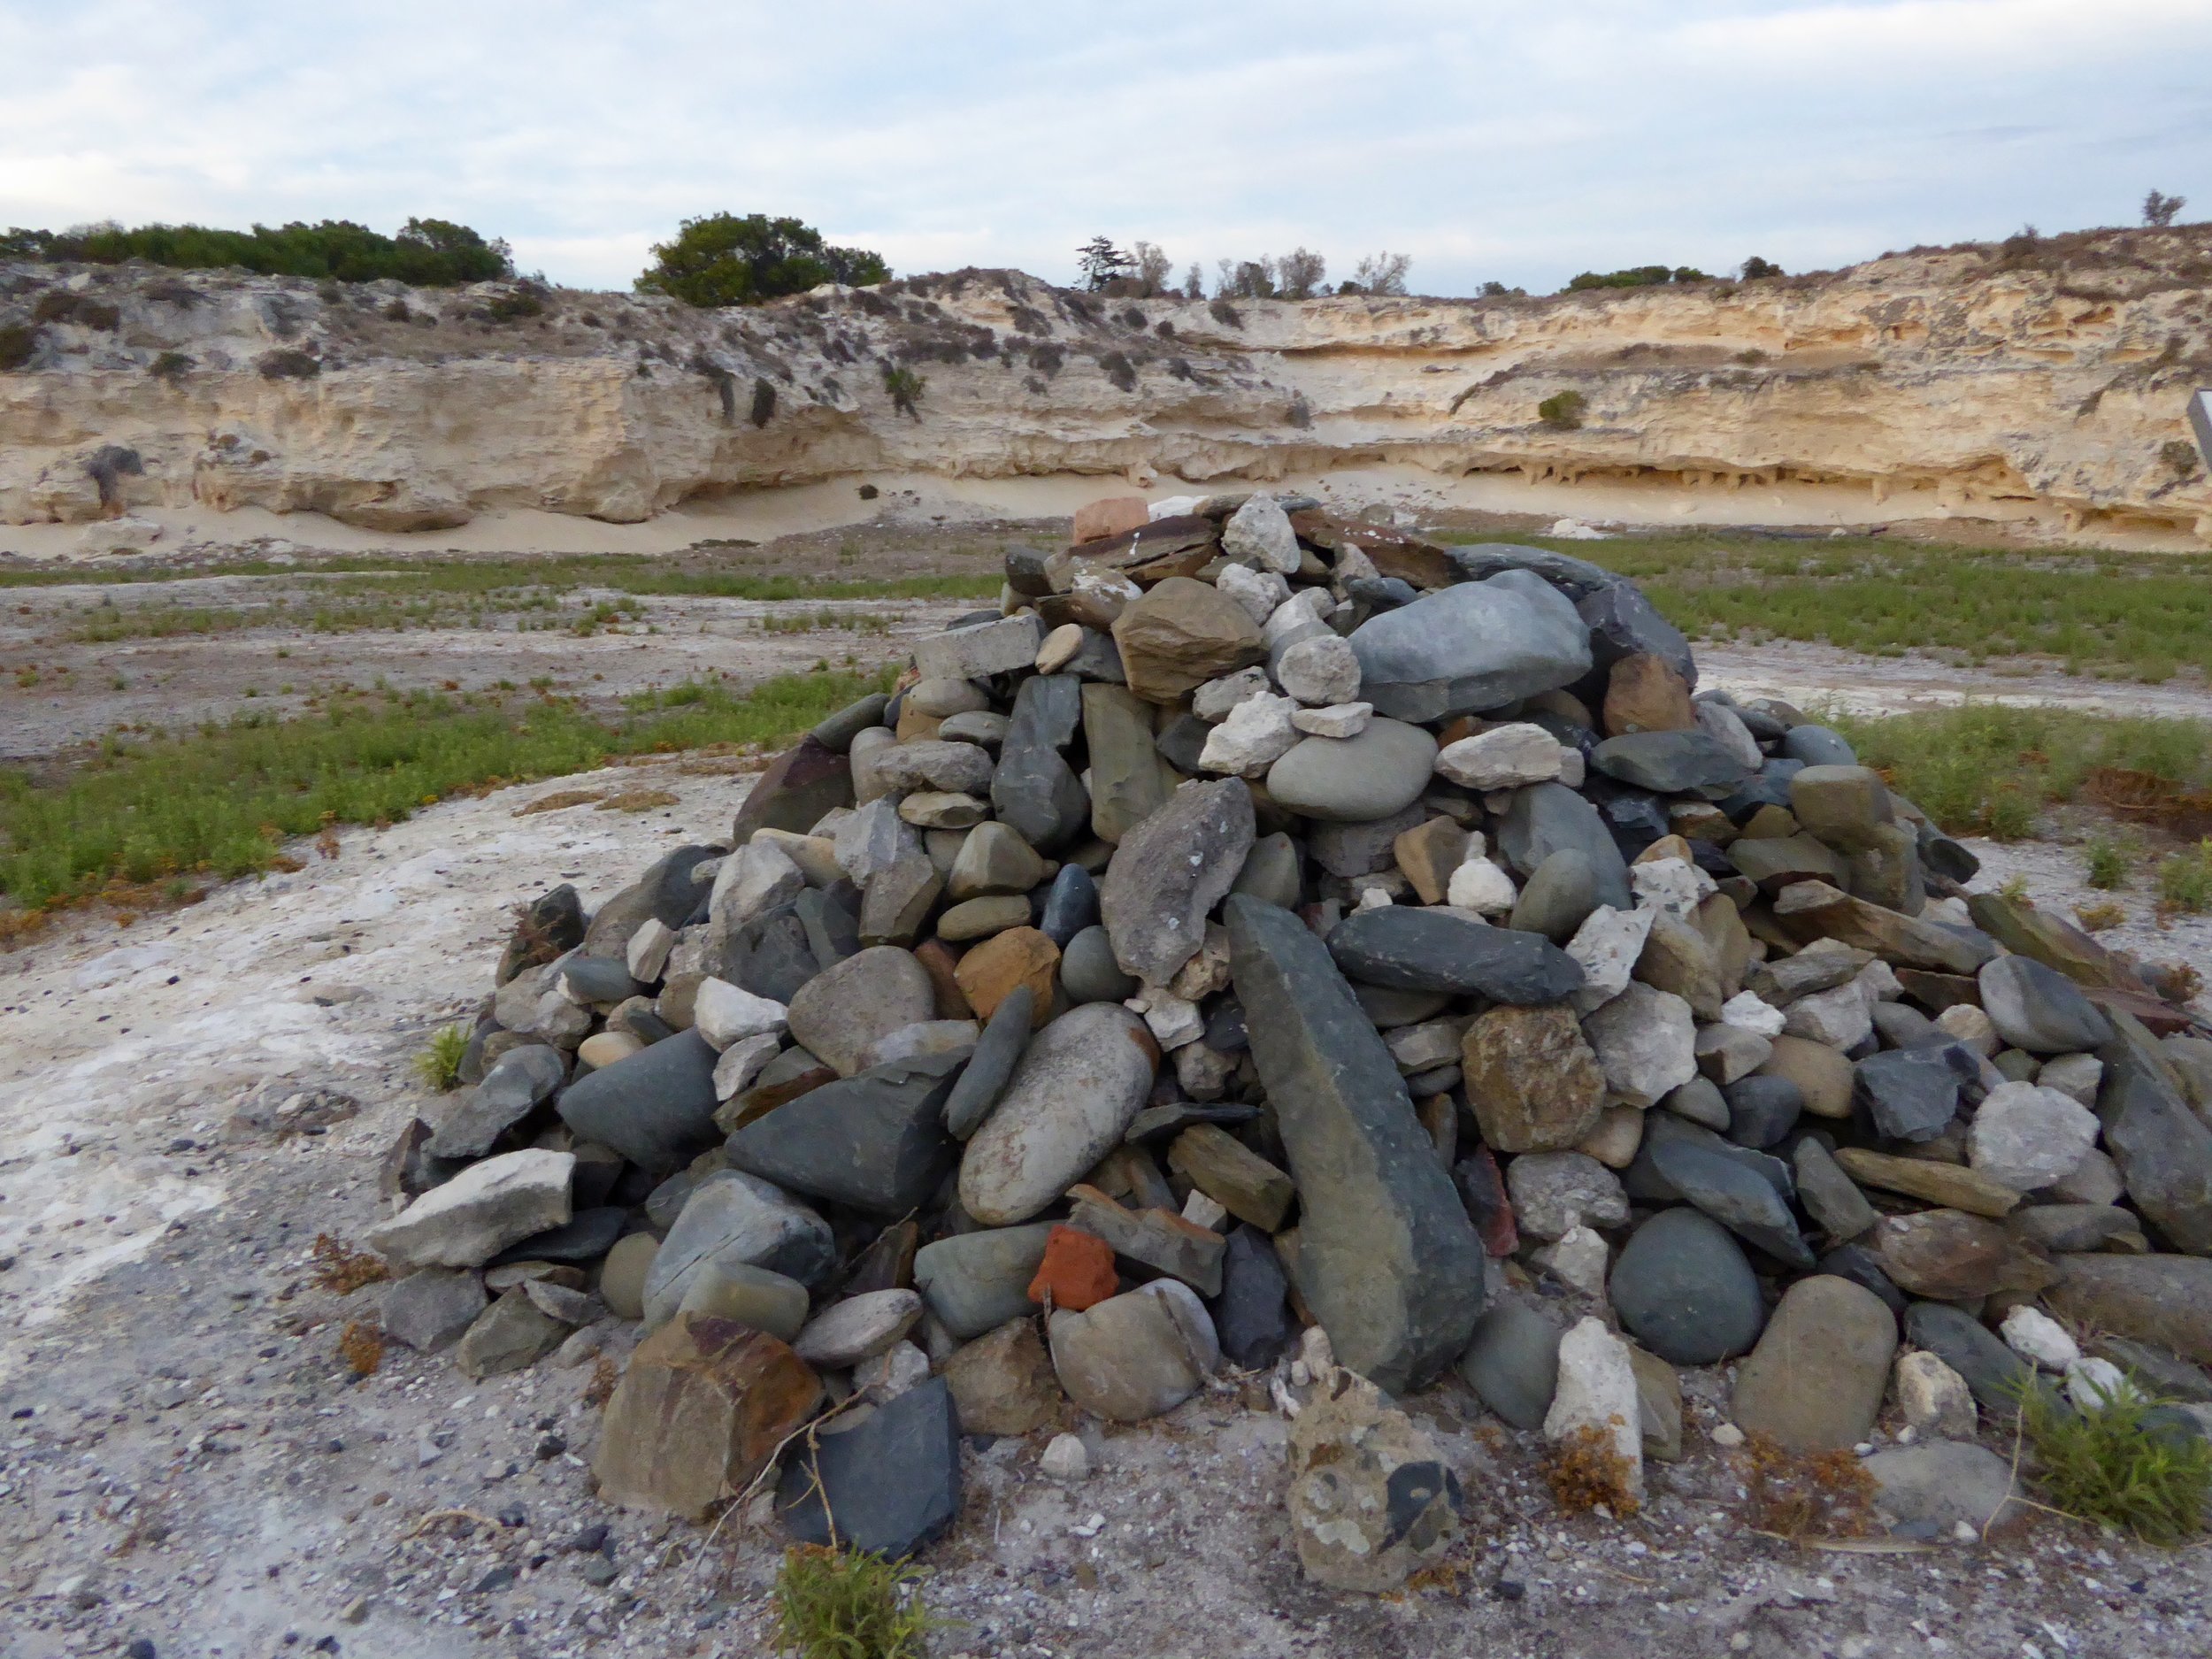  the pile of stones Nelson Mandela and friends made to commemorate freedom in the rock quarry where they had endured forced labor 